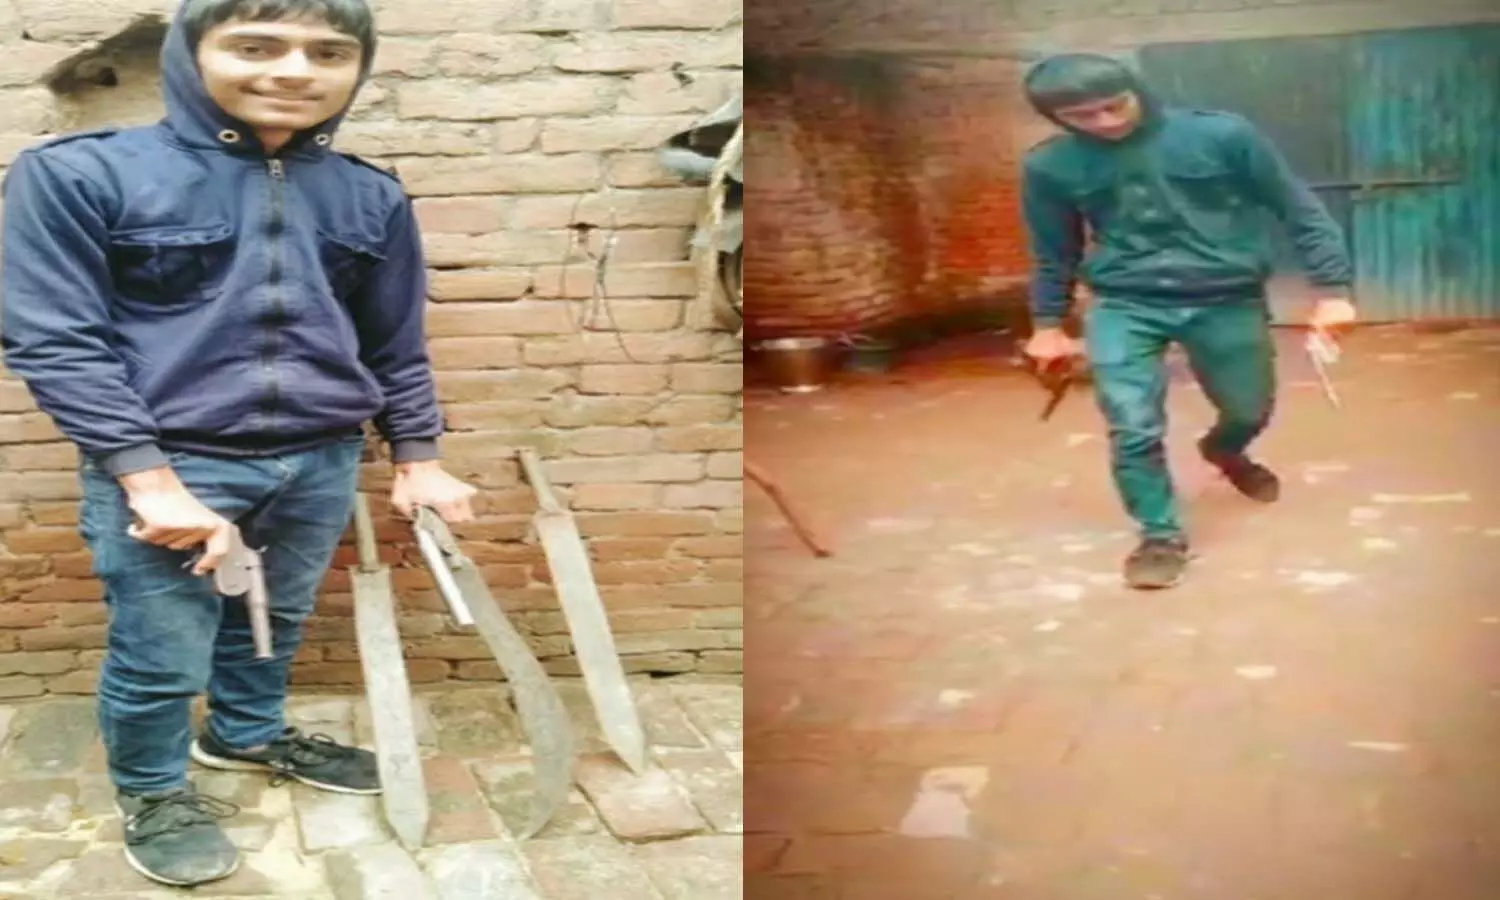 Baghpat Crime News: Video of young man with illegal firearm-edged weapons goes viral, police is investigating